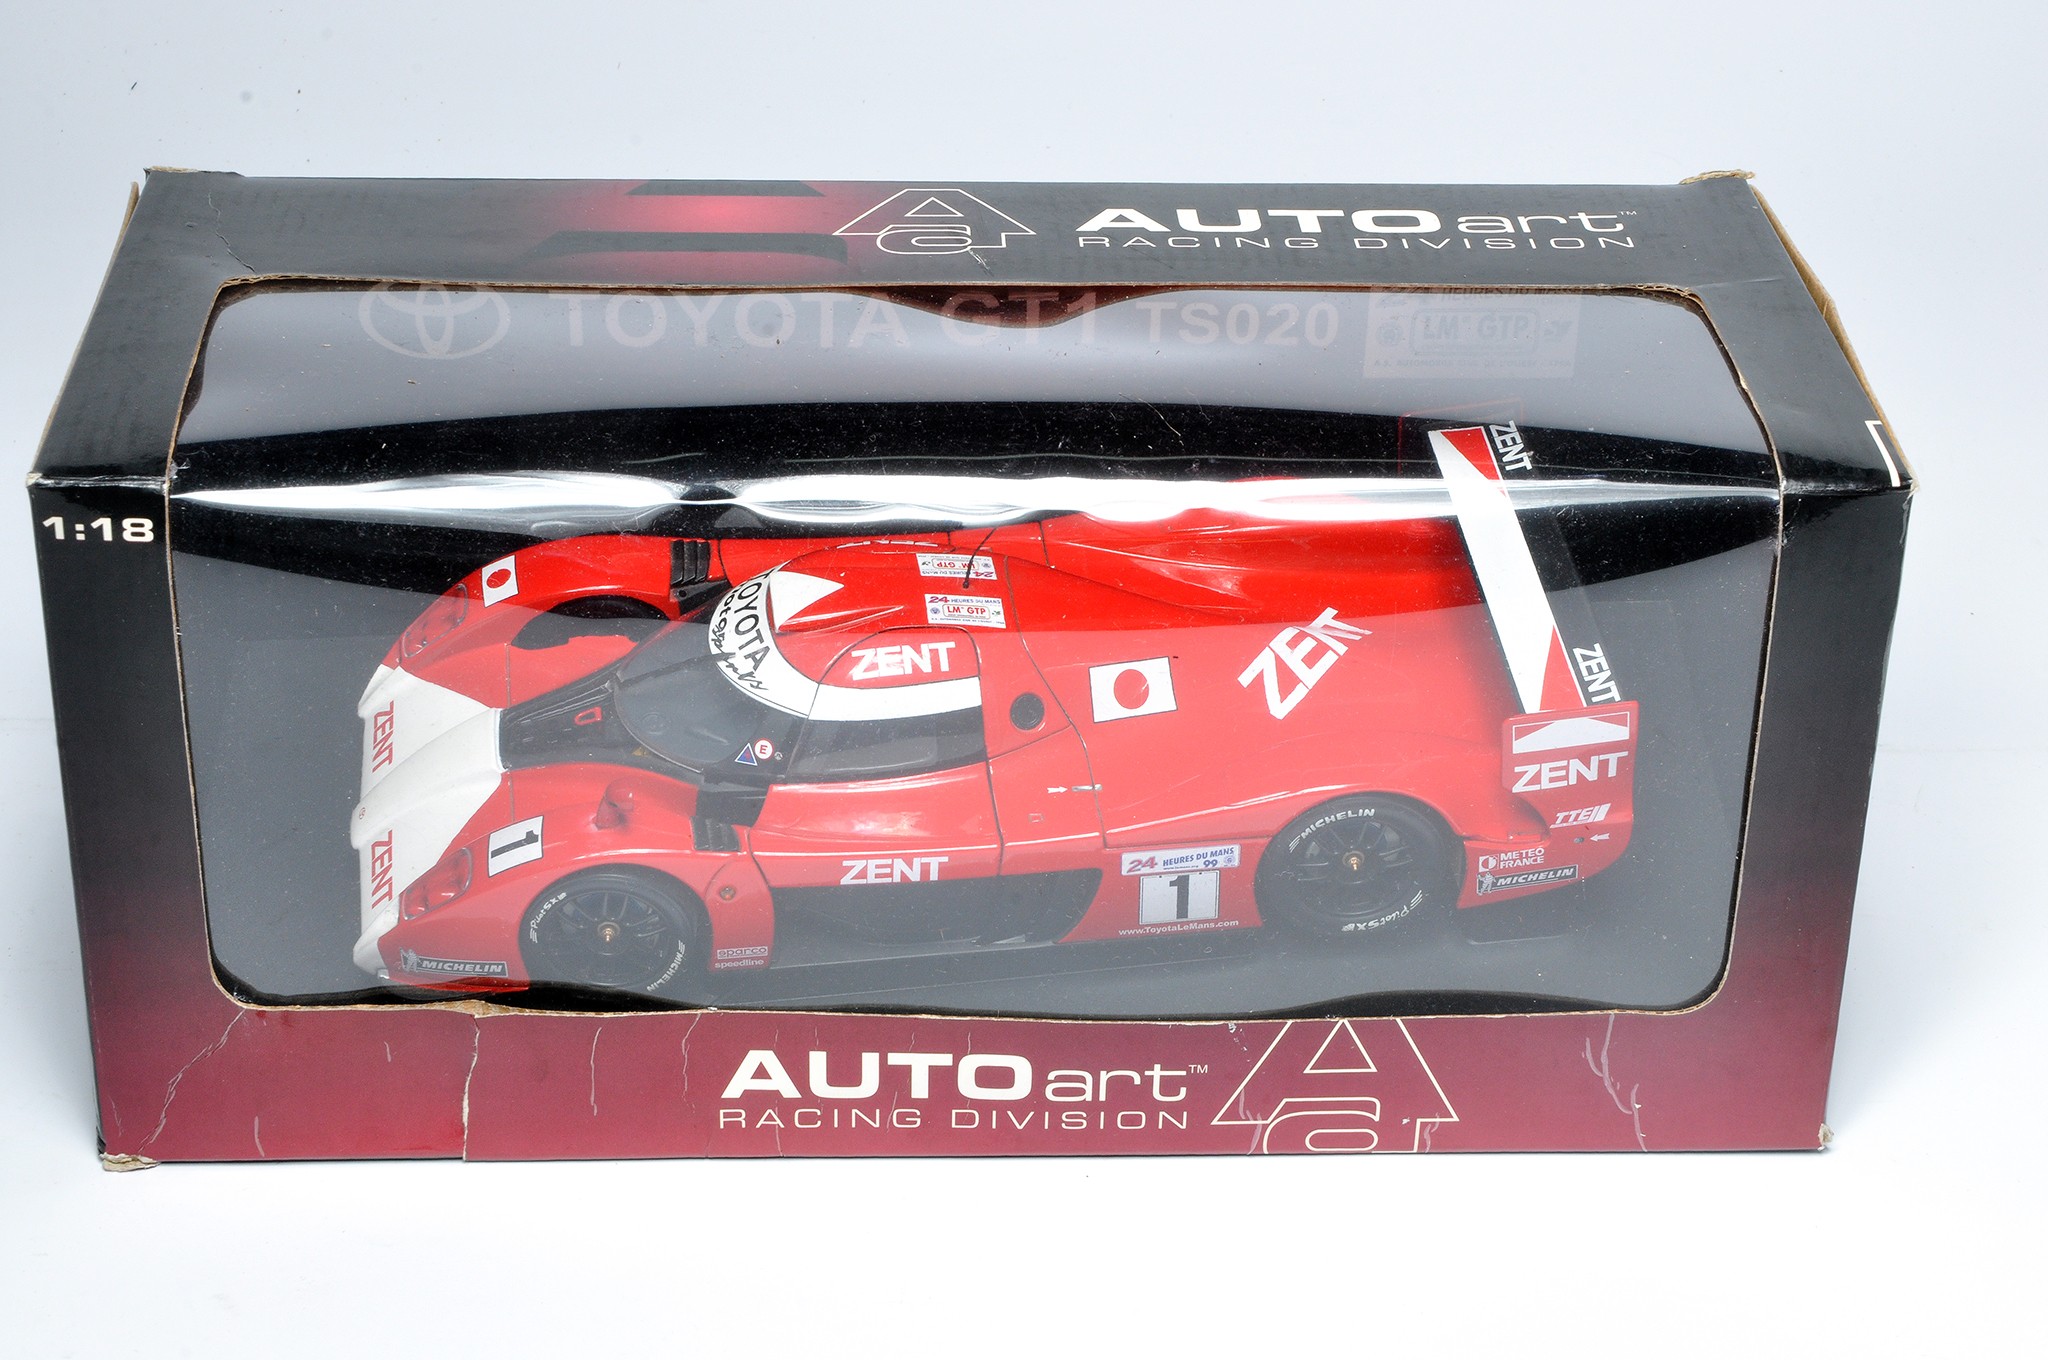 Autoart 1/18 diecast model issue comprising Toyota Gt1 Le Mans Racing Car. Looks to be without